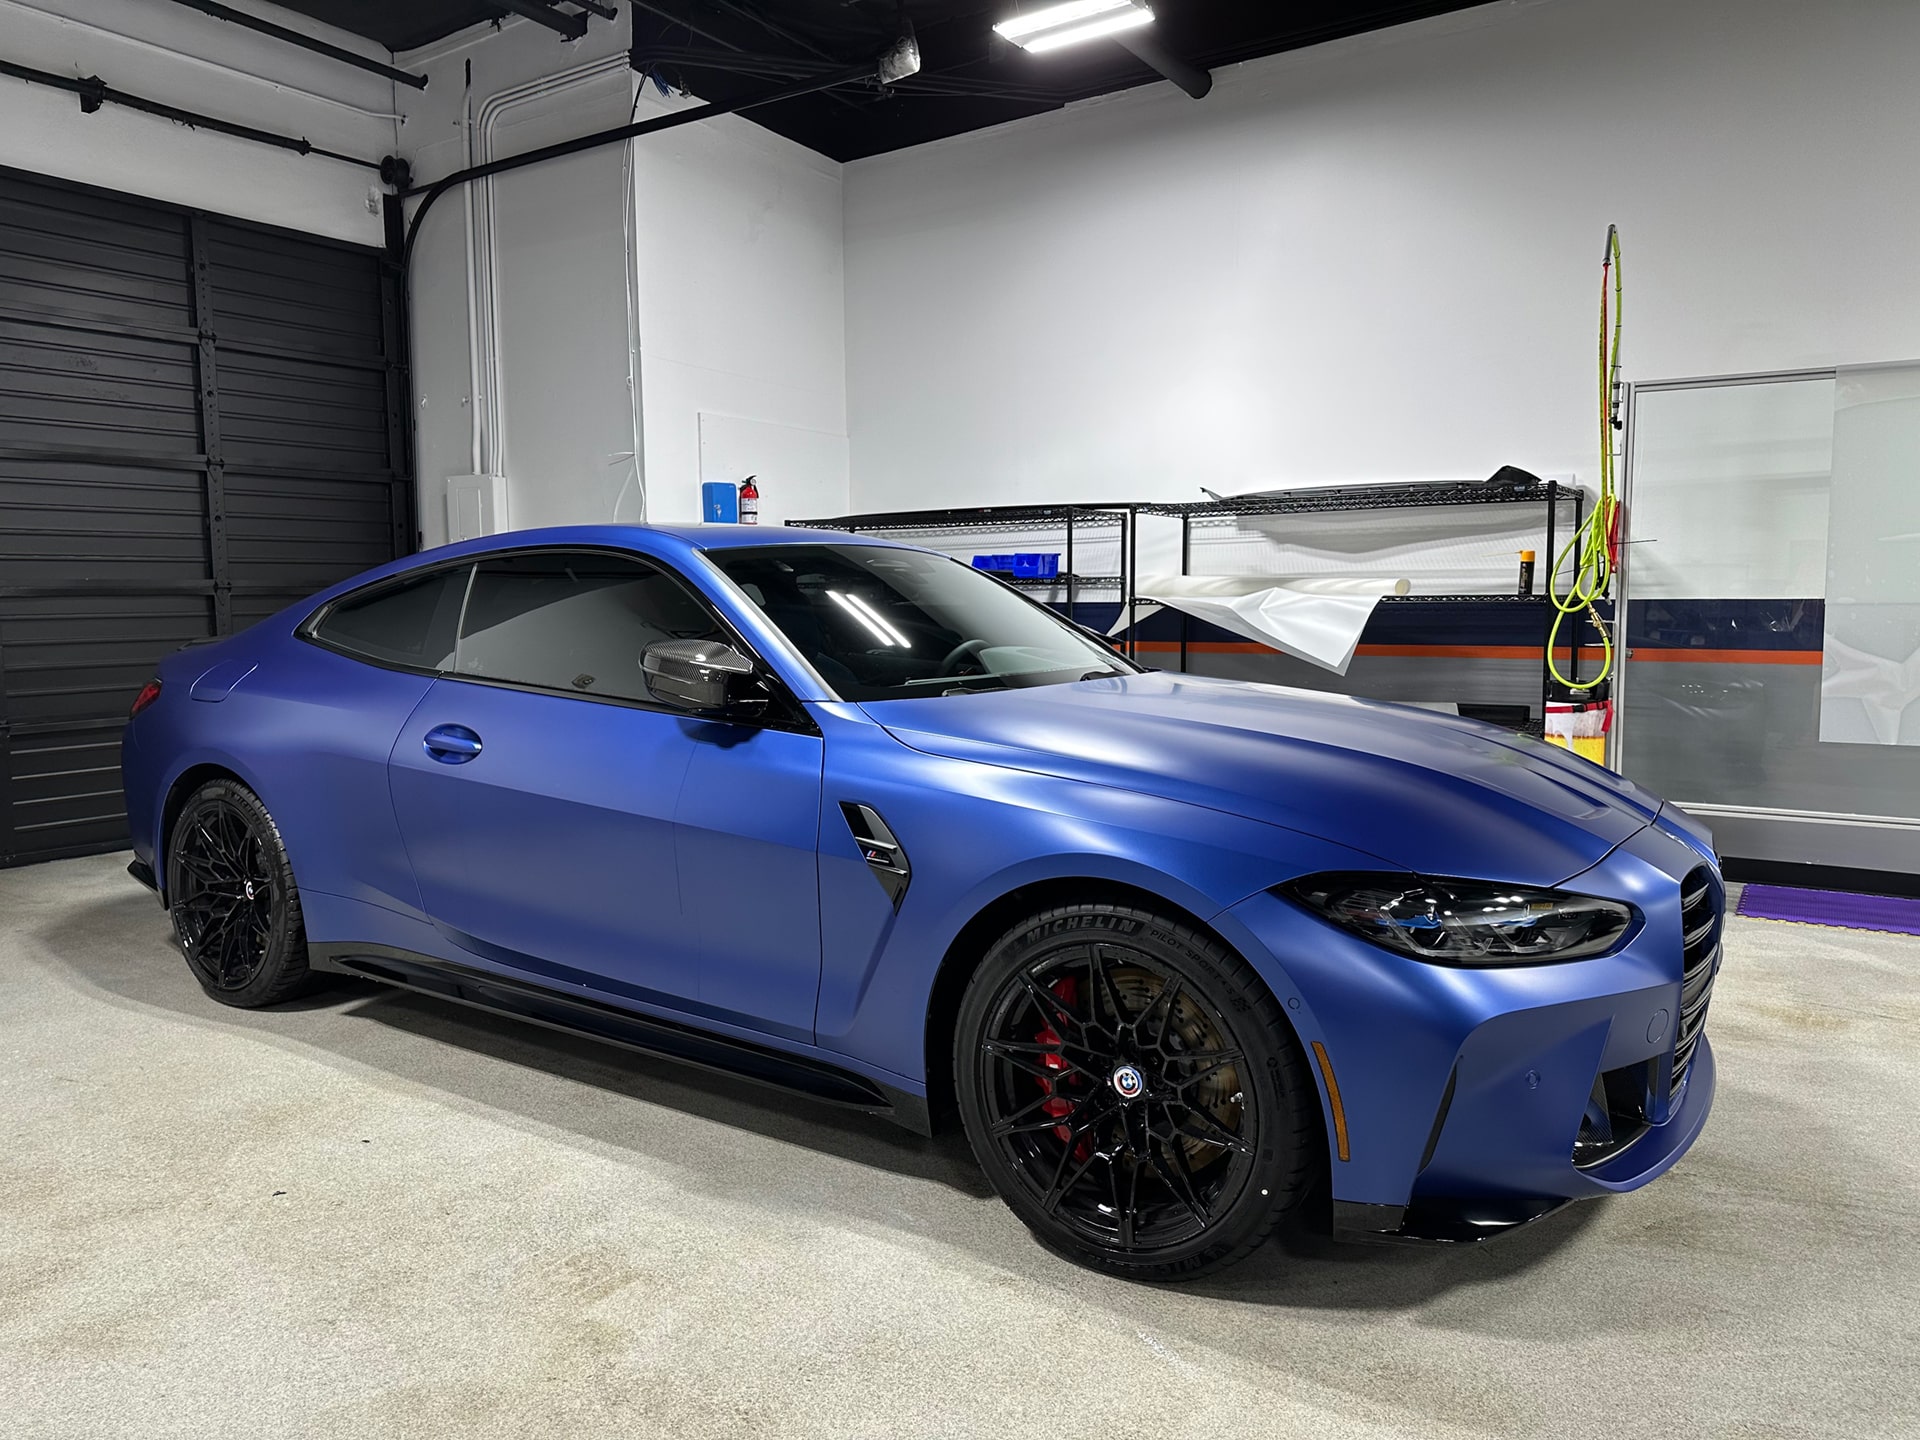 How does PPF compare to vinyl wraps?